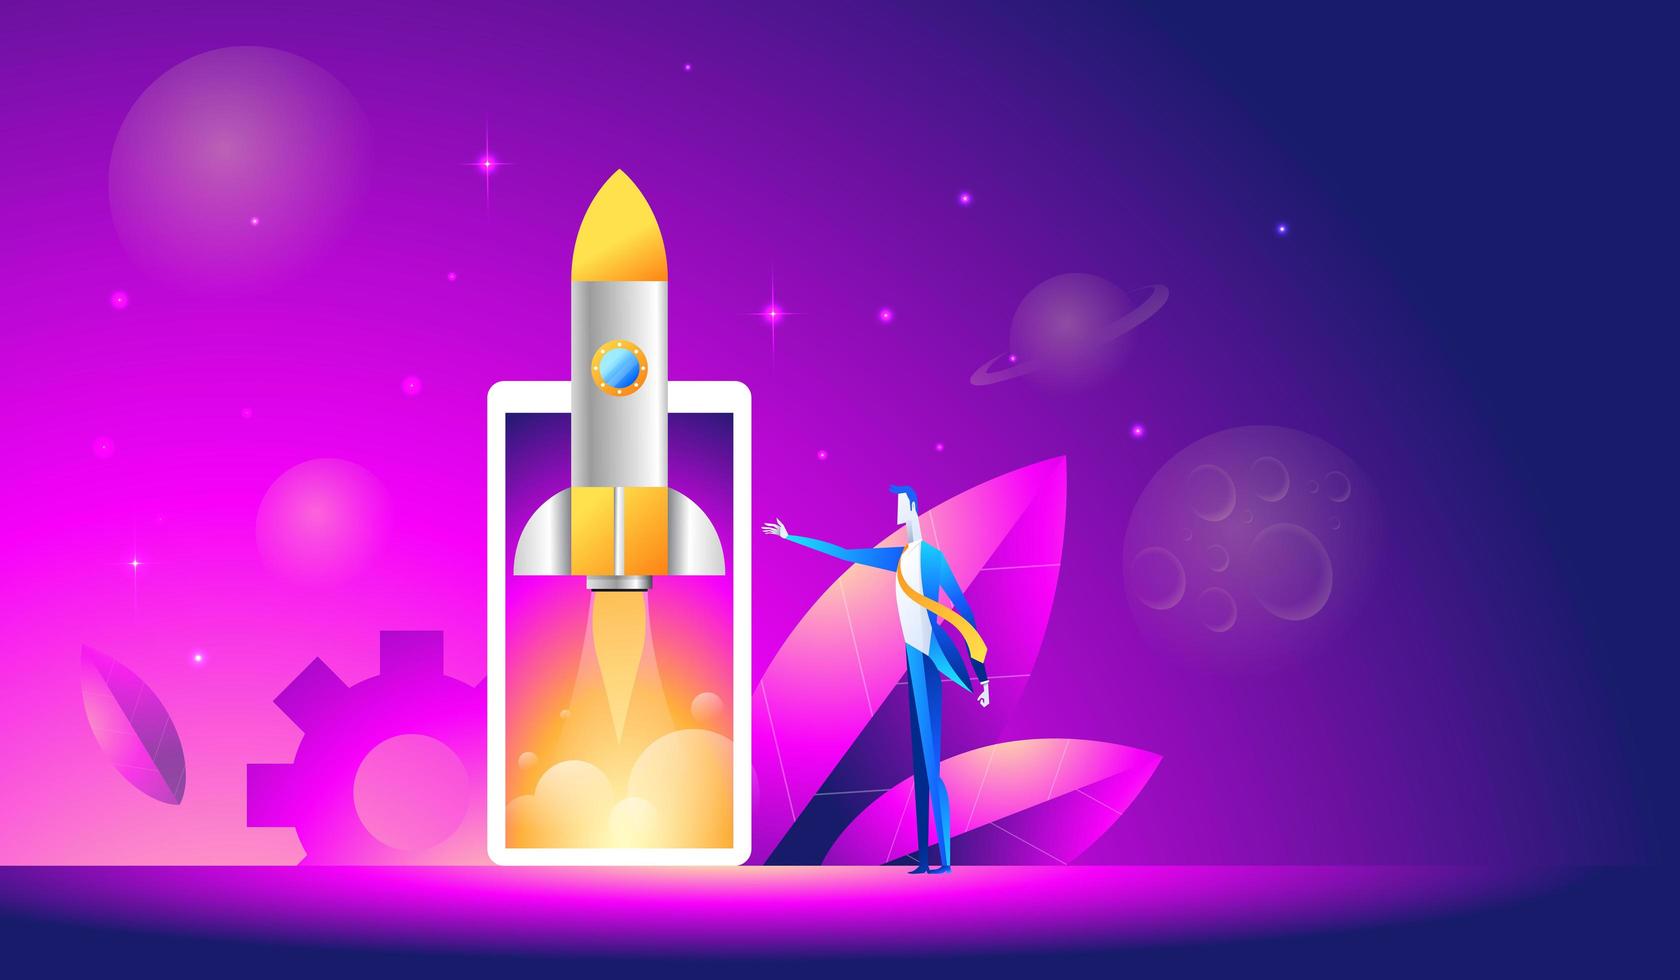 Launch of a mobile application isometric illustration. Takeoff rocket or spacecraft over the mobile phone vector